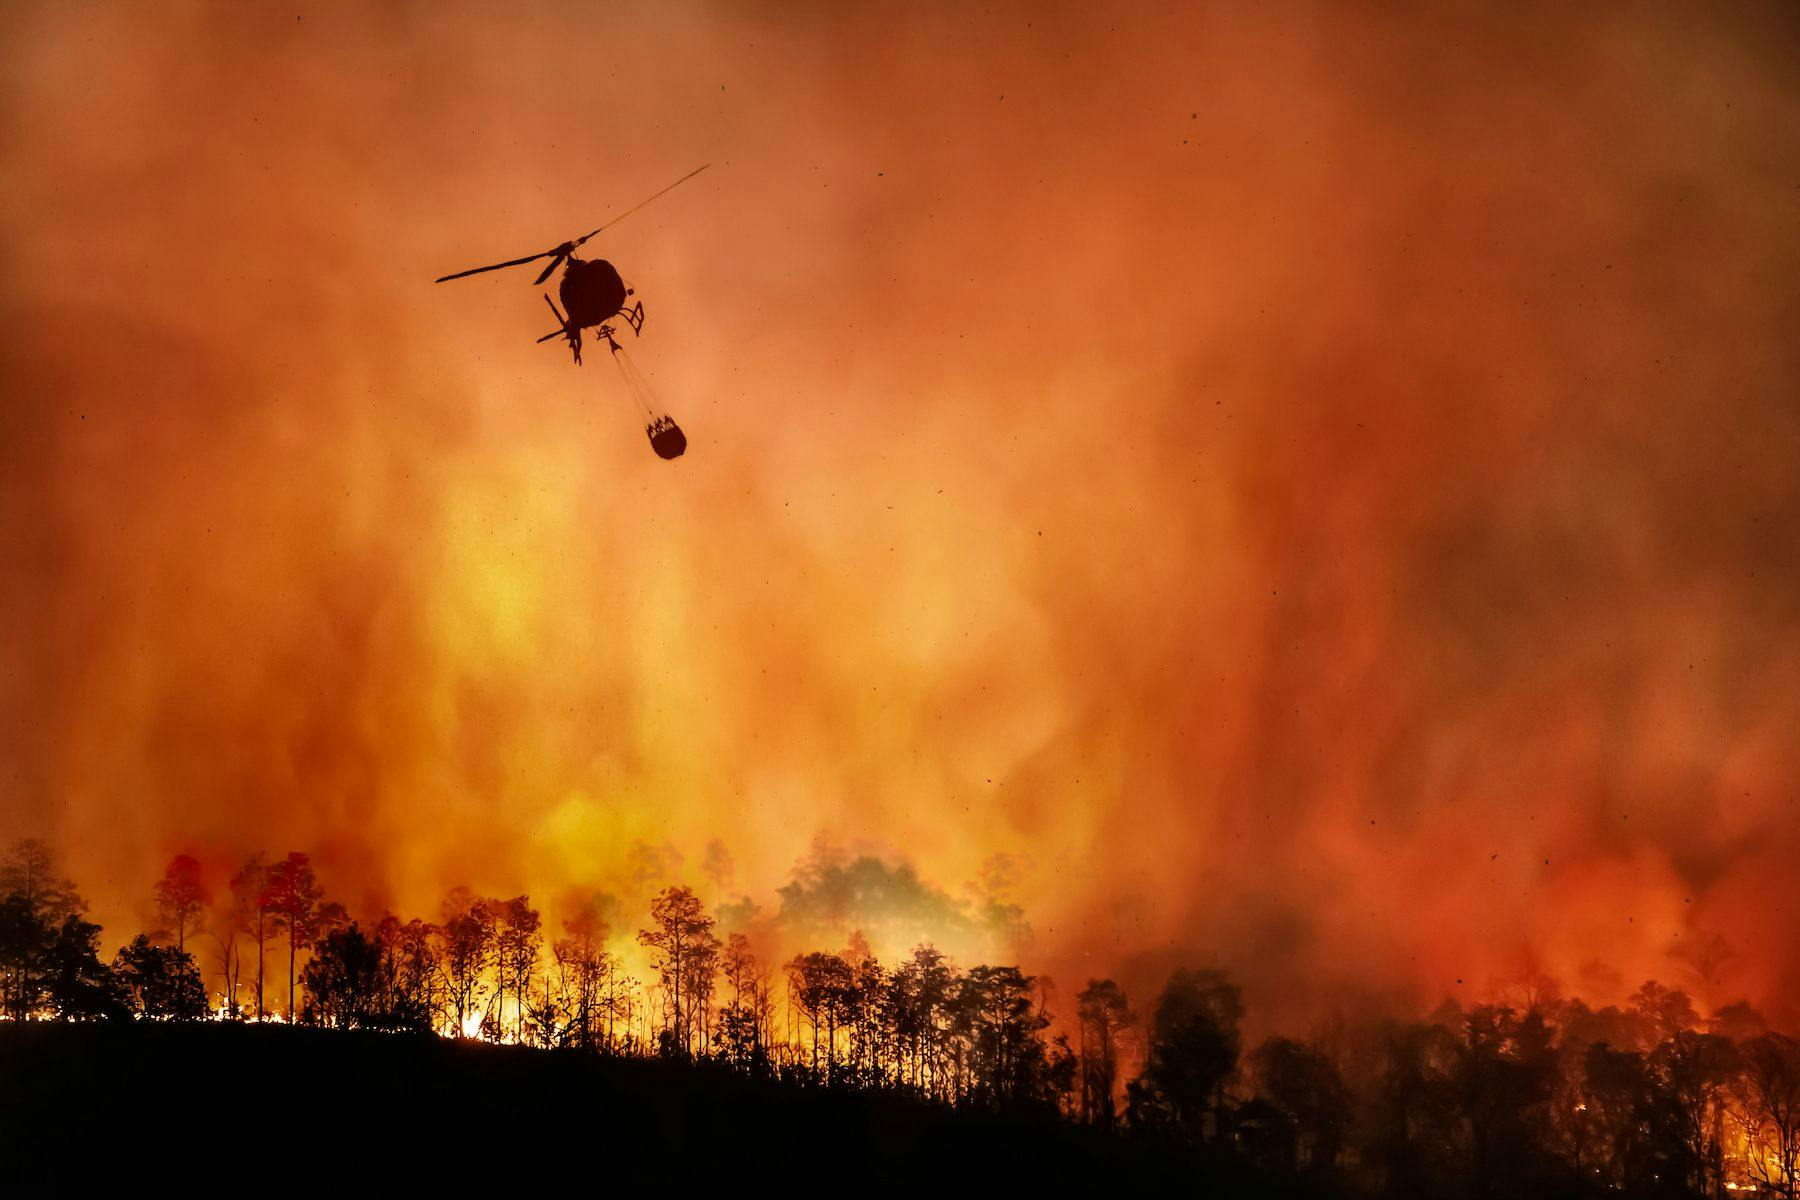 Researchers found a significant increase in psychotropic medication prescriptions in California metropolitan statistical areas affected by wildfires. | image credit: toa555 - stock.adobe.com